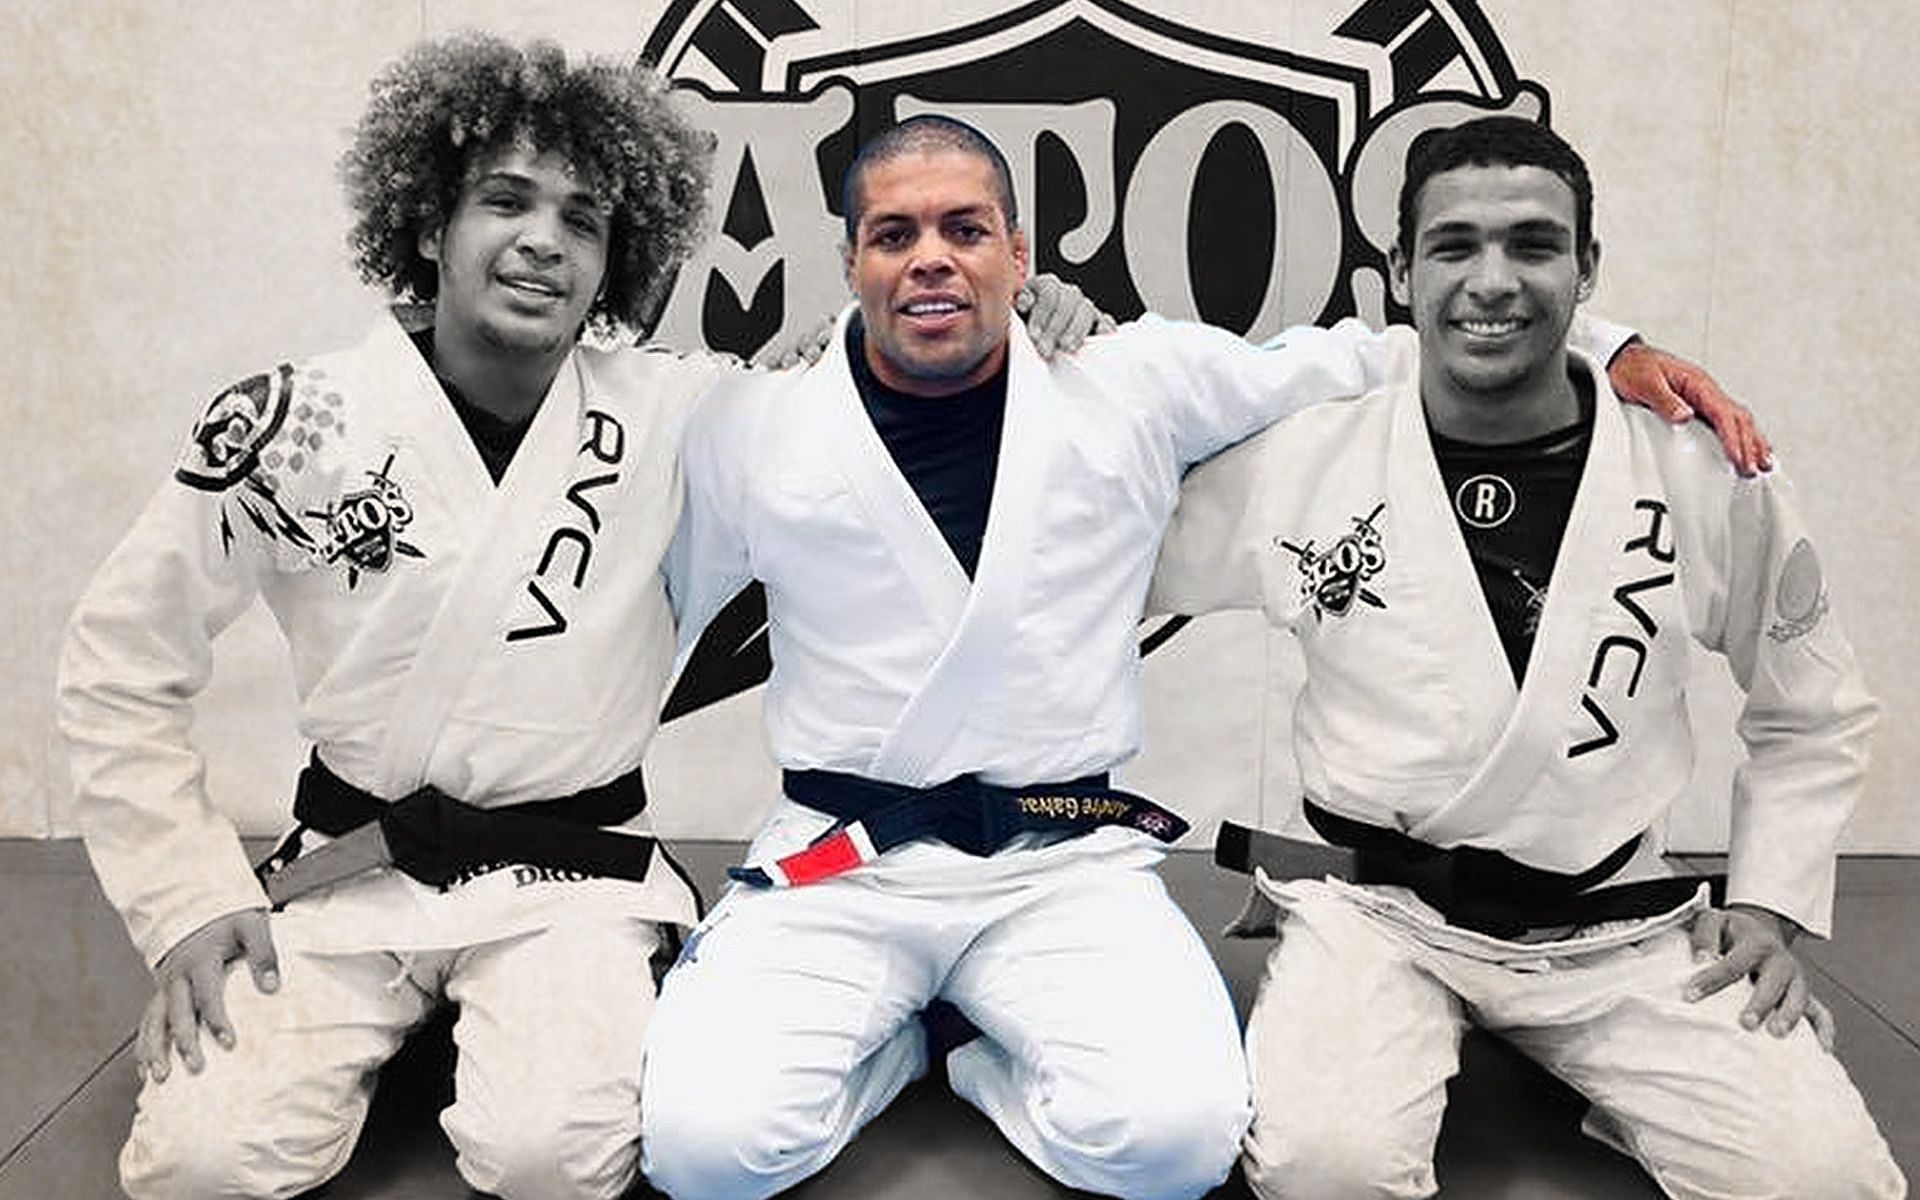 Andre Galvao (C) is a legend in BJJ as a competitor and a mentor to rising stars like the Ruotolo Brothers, Tye (R) and Kade(L). | [Photo: ONE Championship]